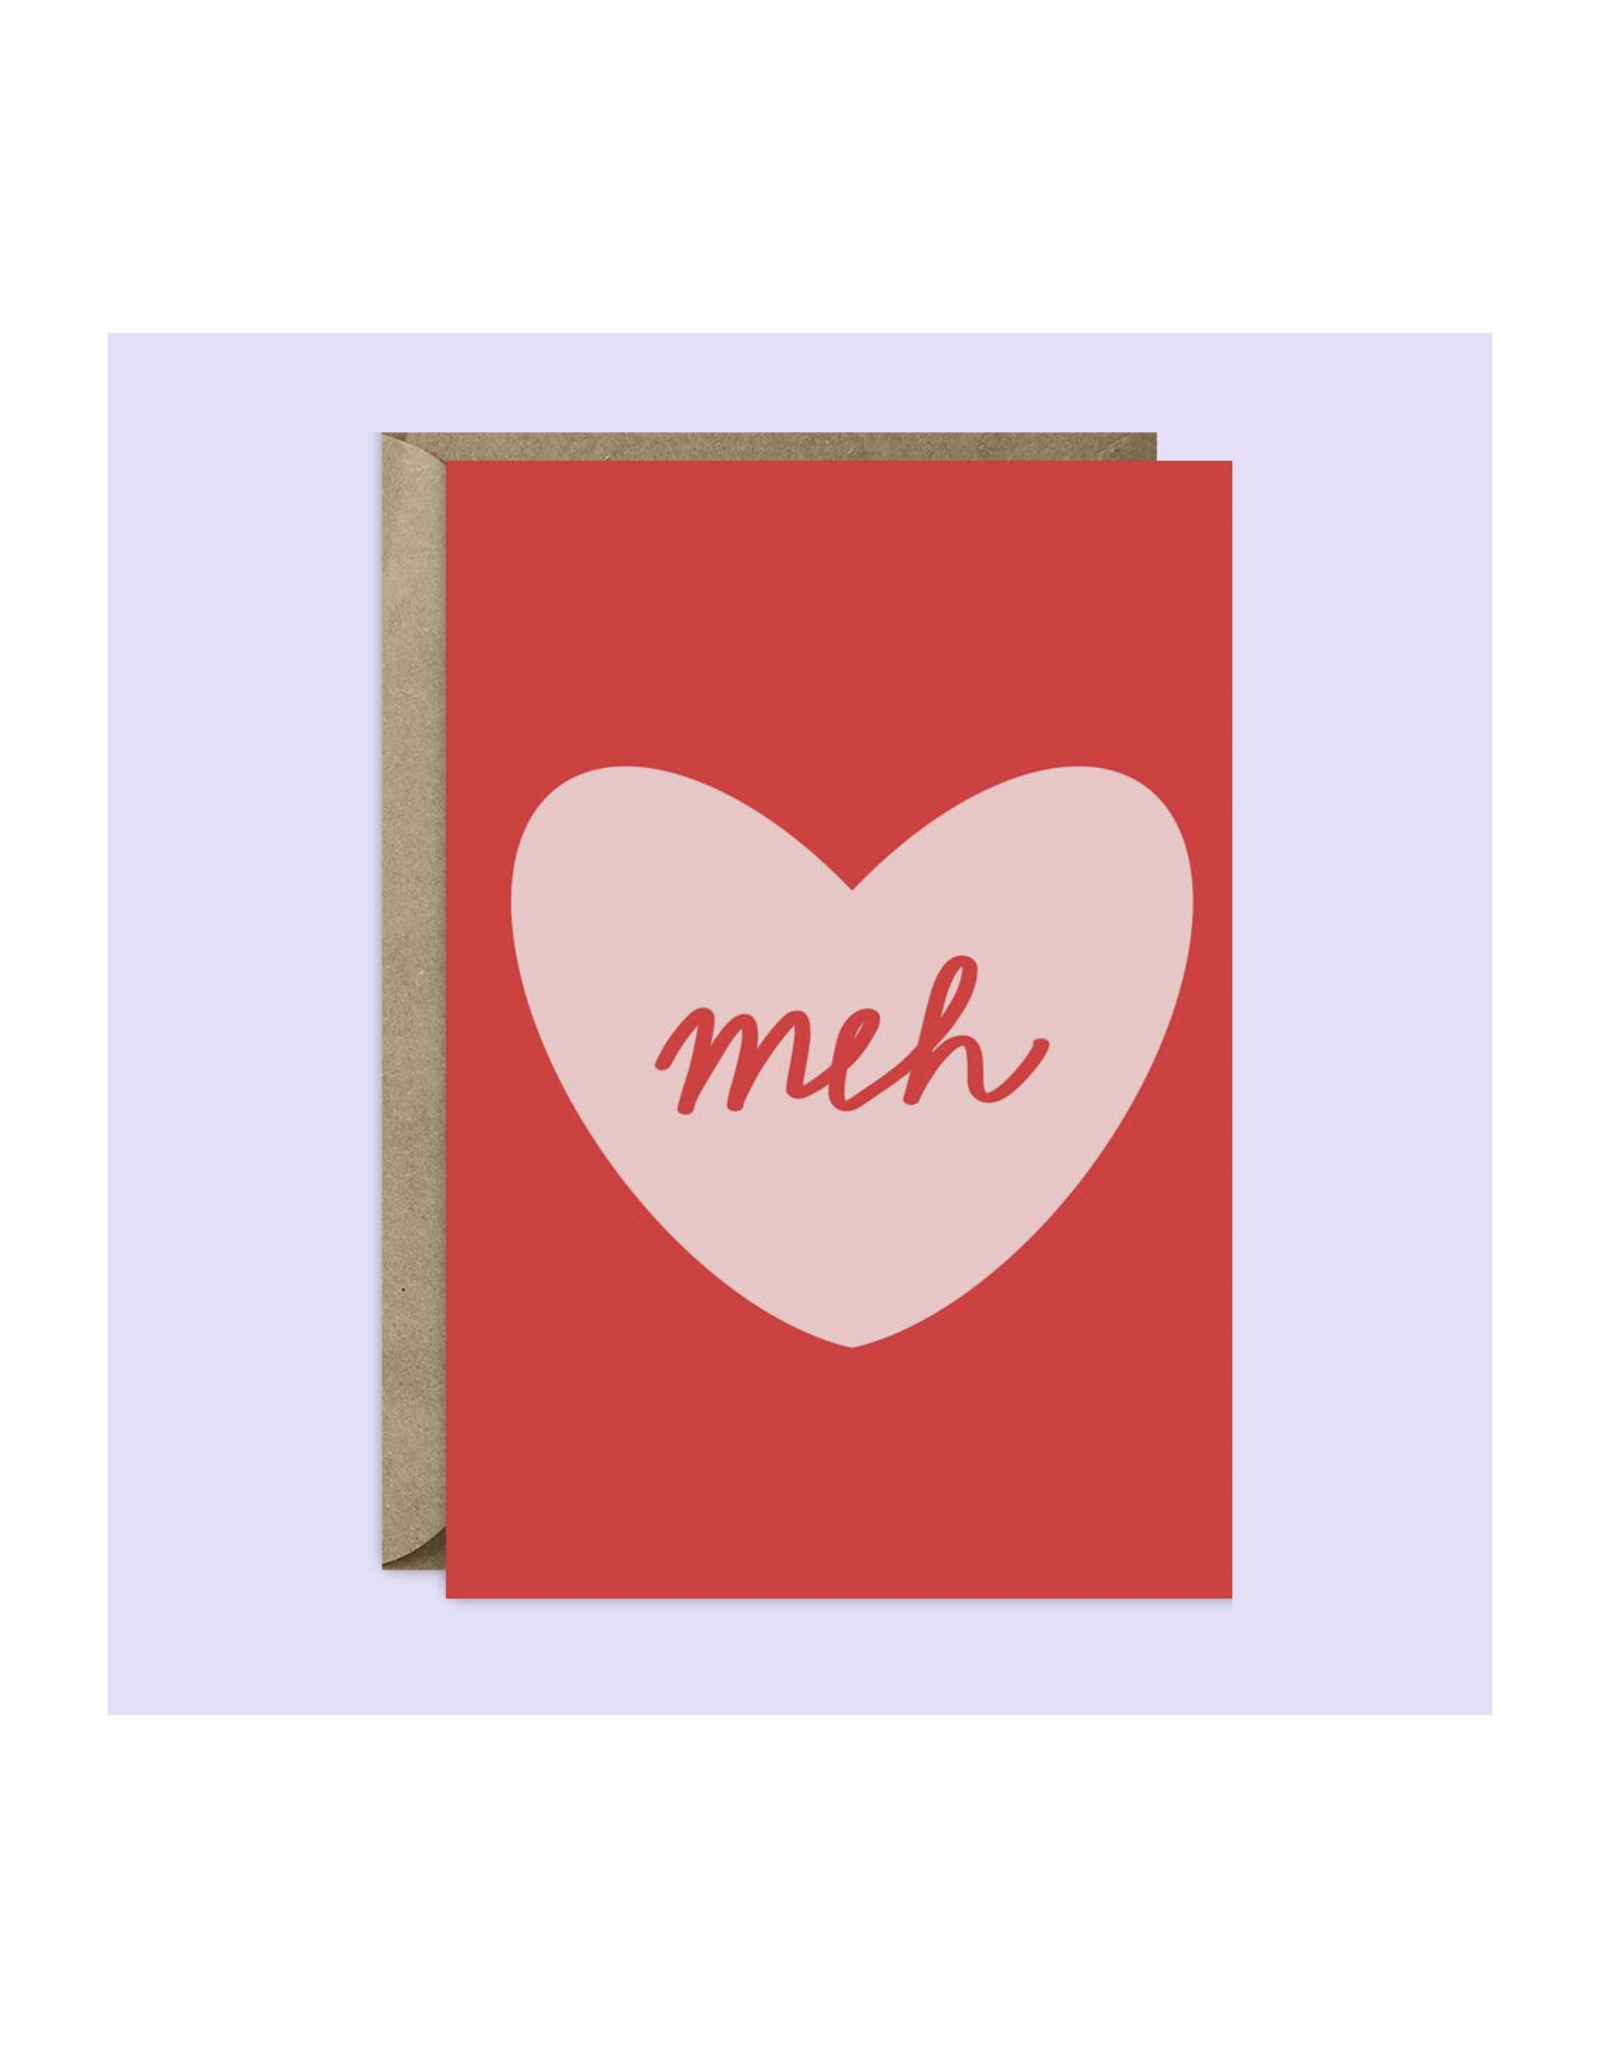 Meh Heart Greeting Card